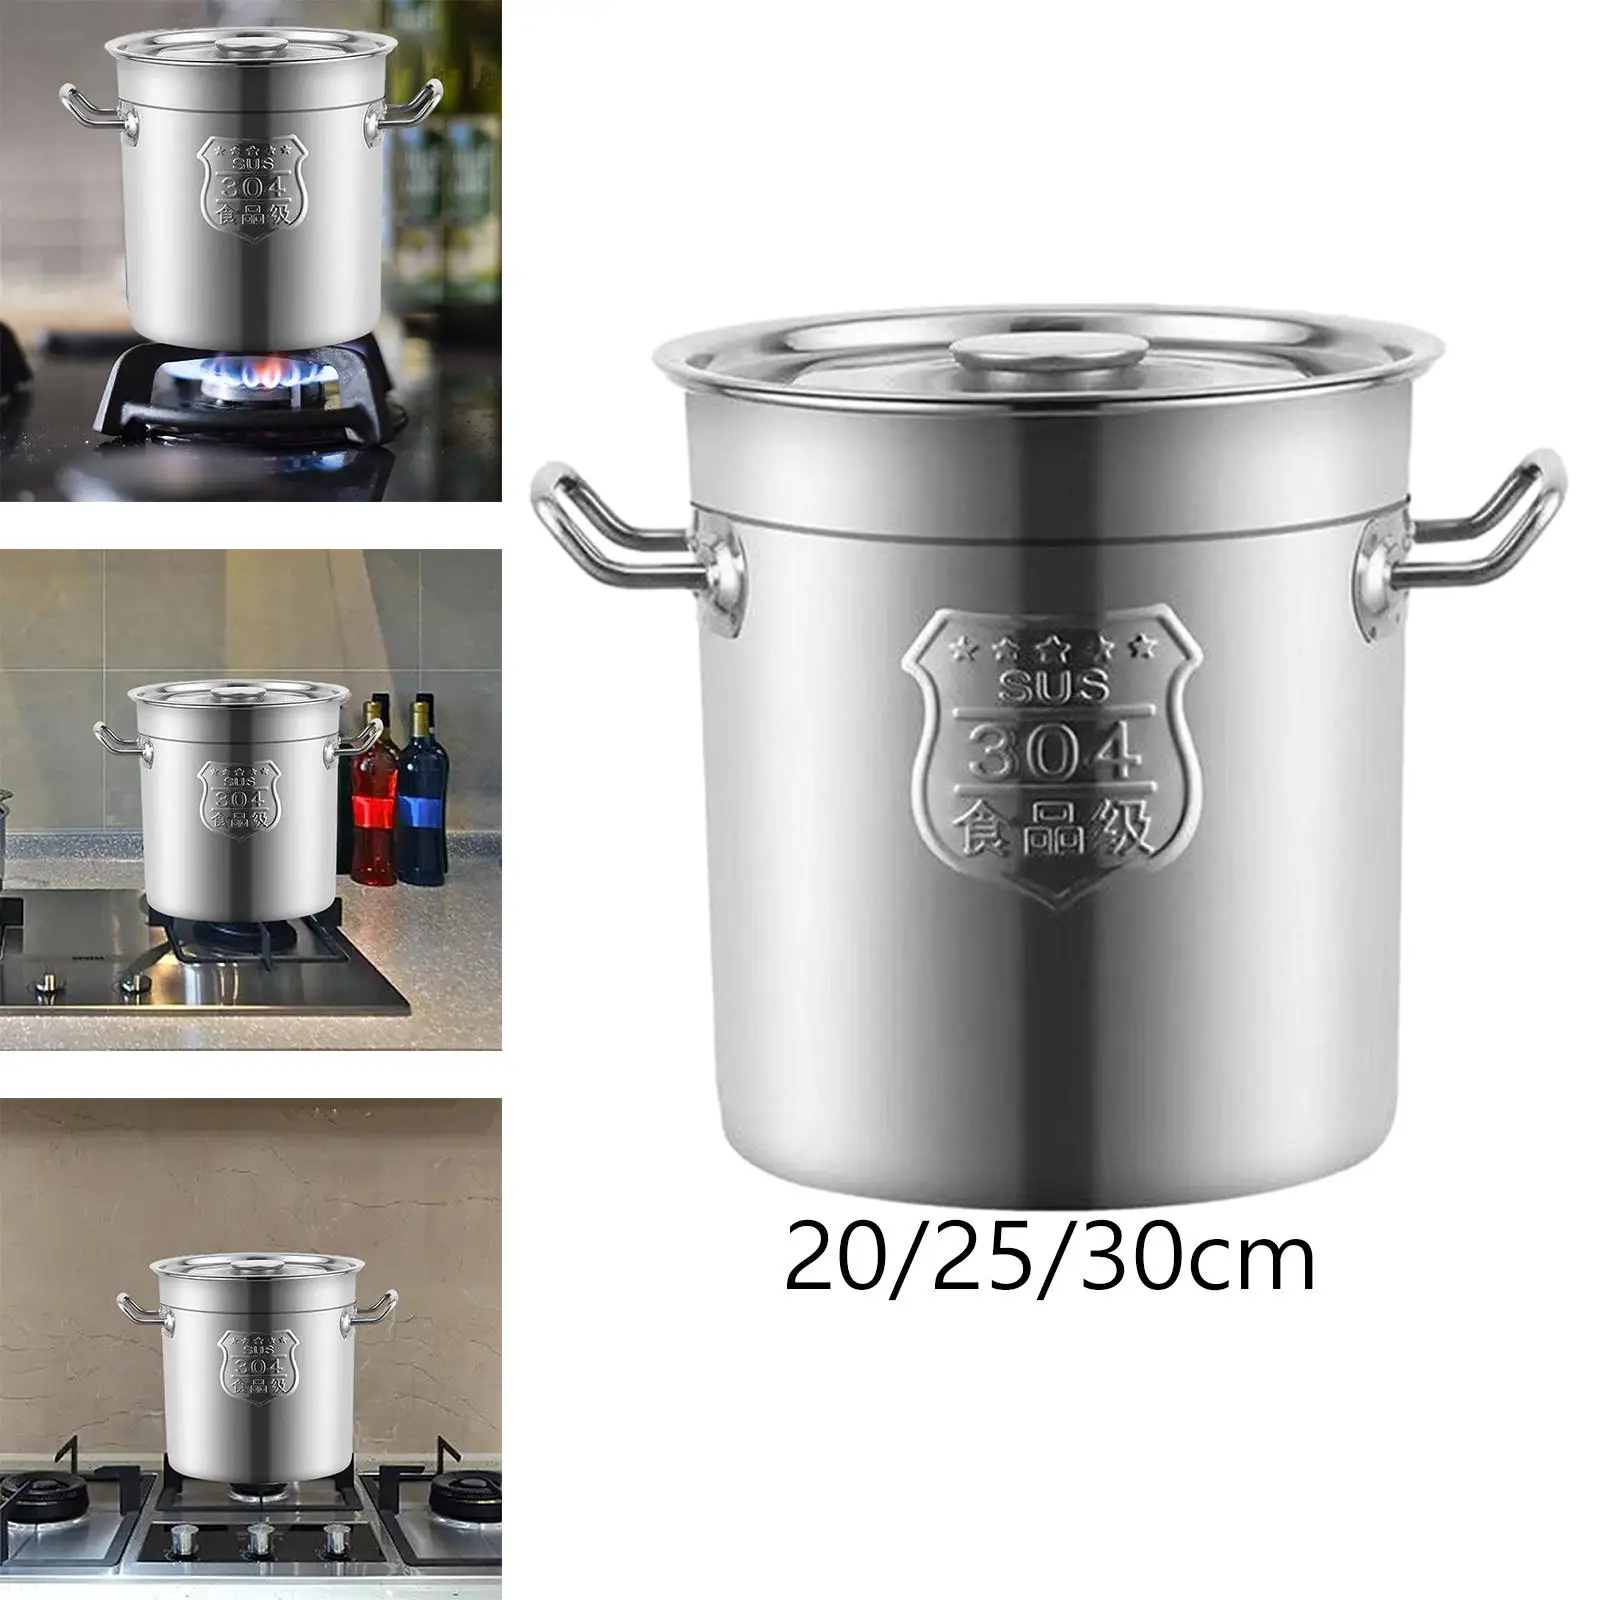 Stainless Steel Soup Pot Polished Cookware Suitable for All Stovetop Multipurpose Commercial Stockpot with Lid for Household